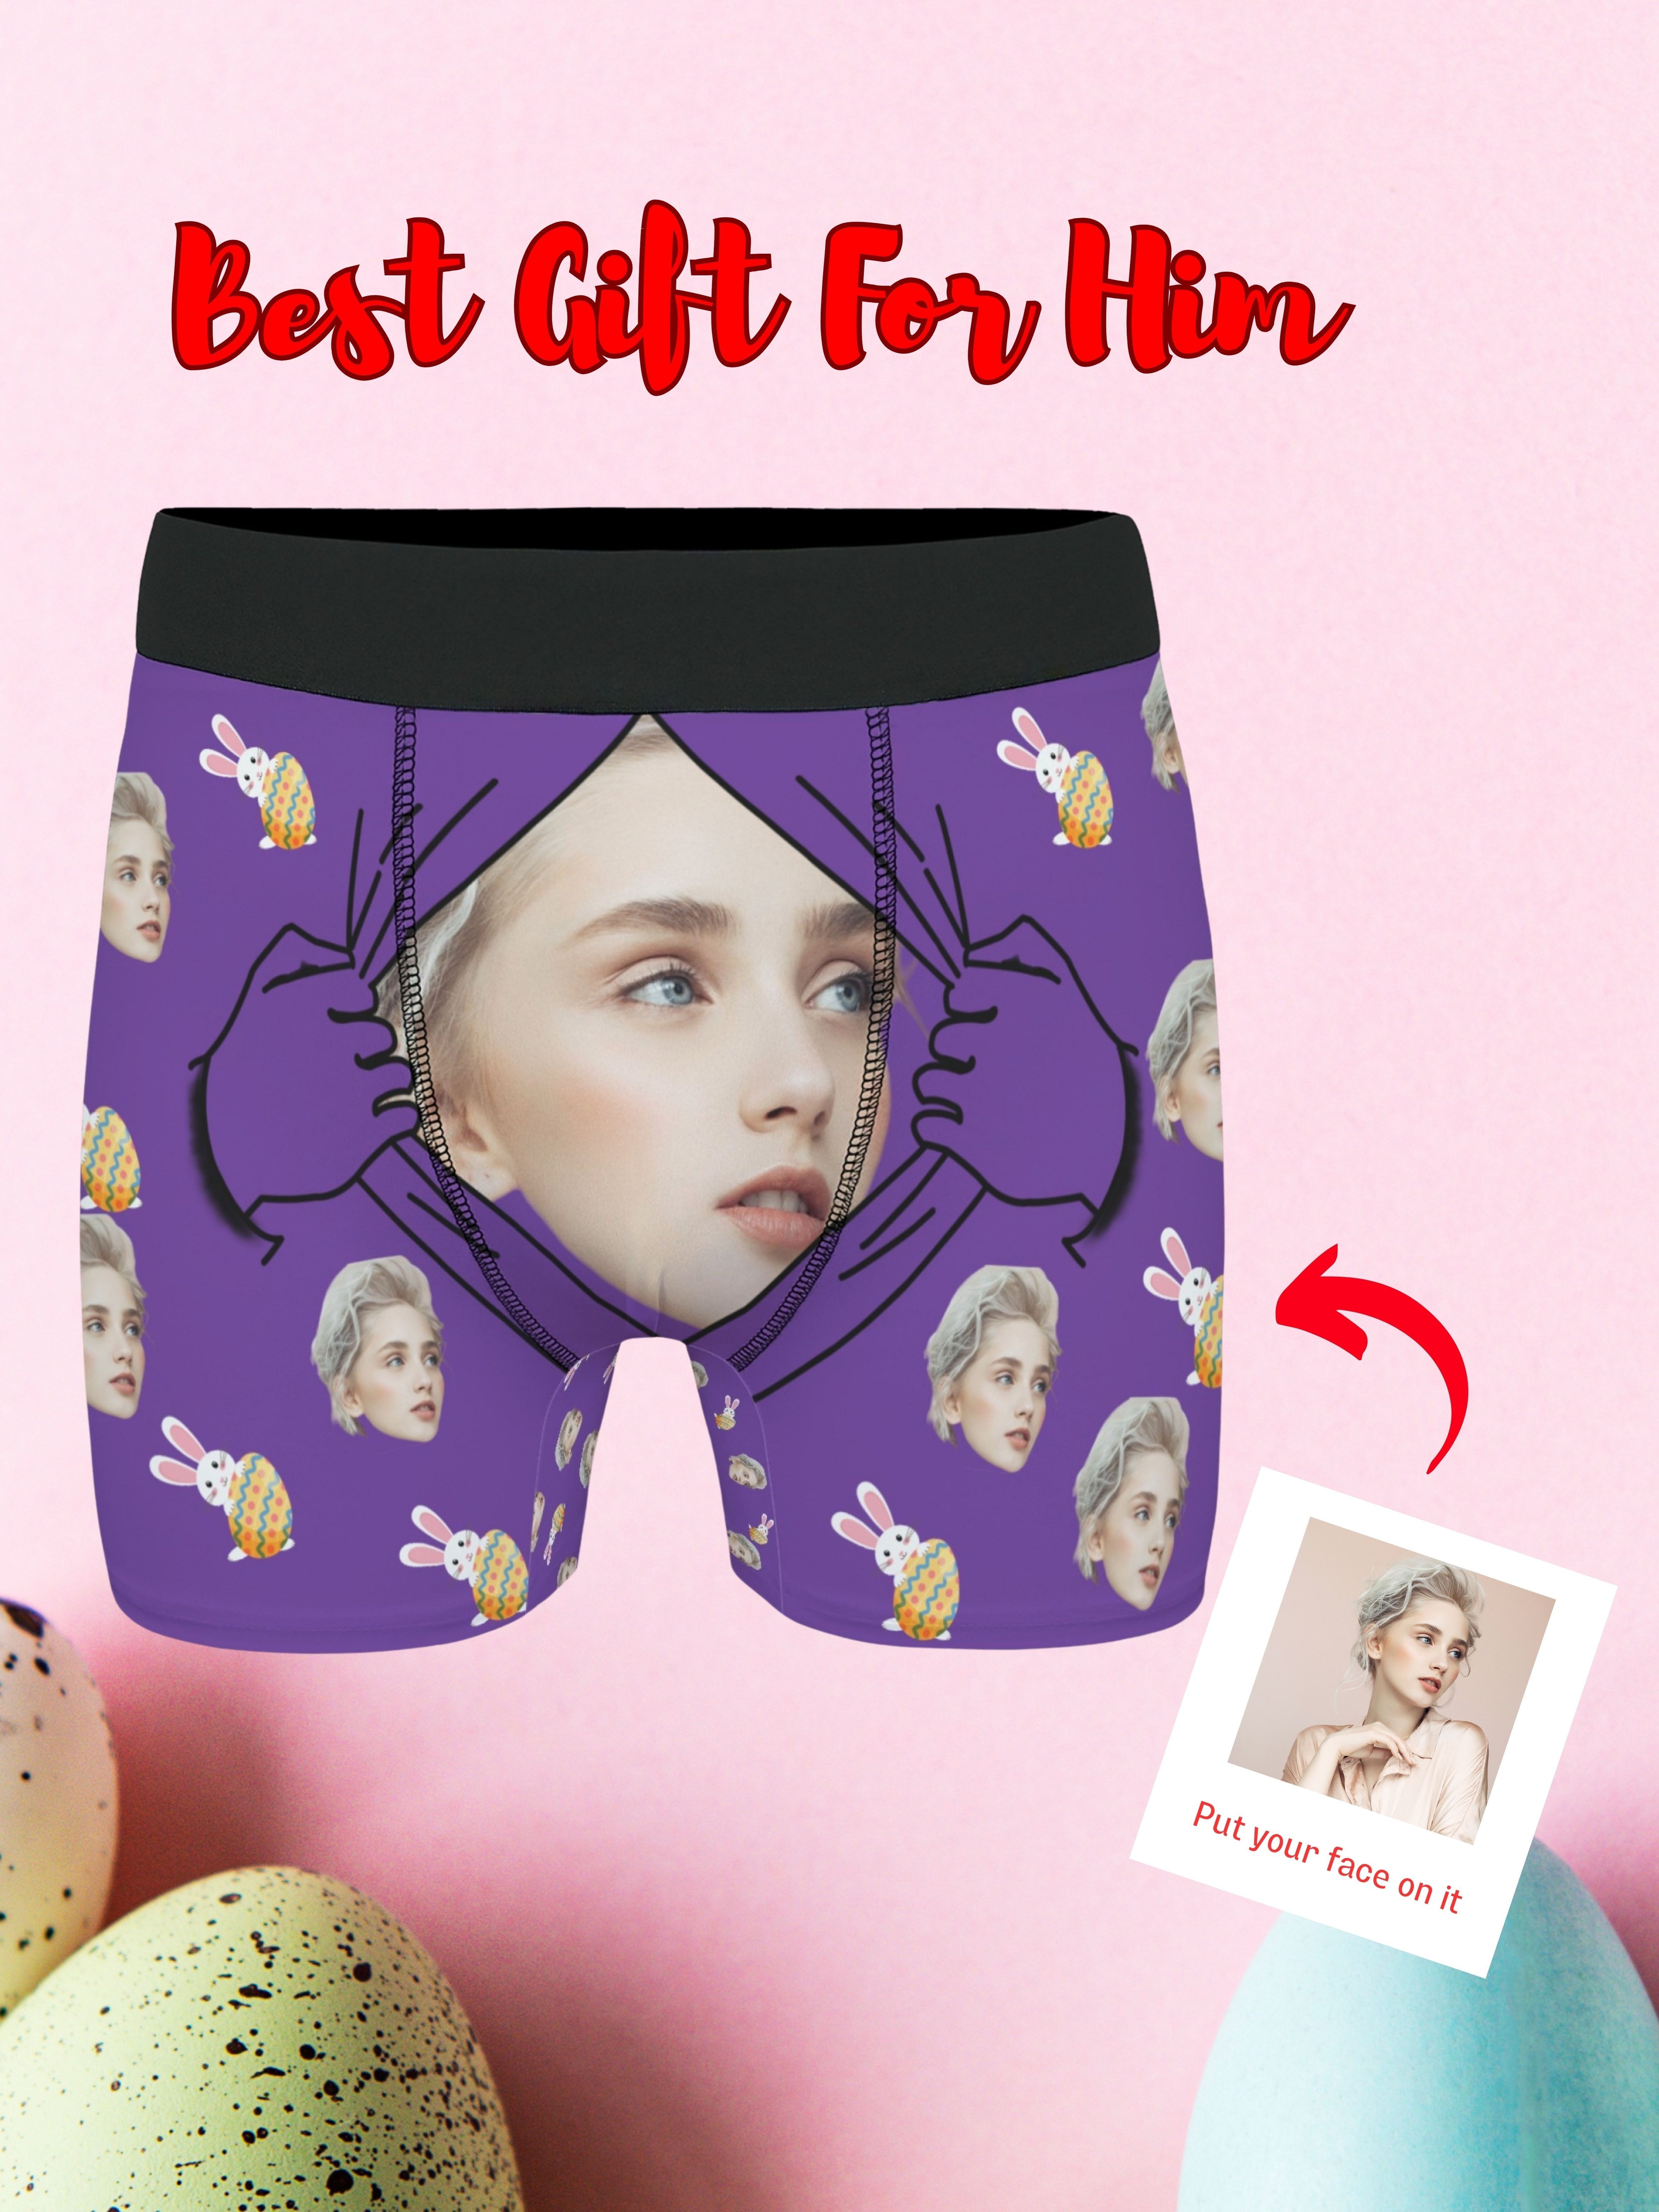 Funny Women's Underwear Personalised Underwear With Your Face